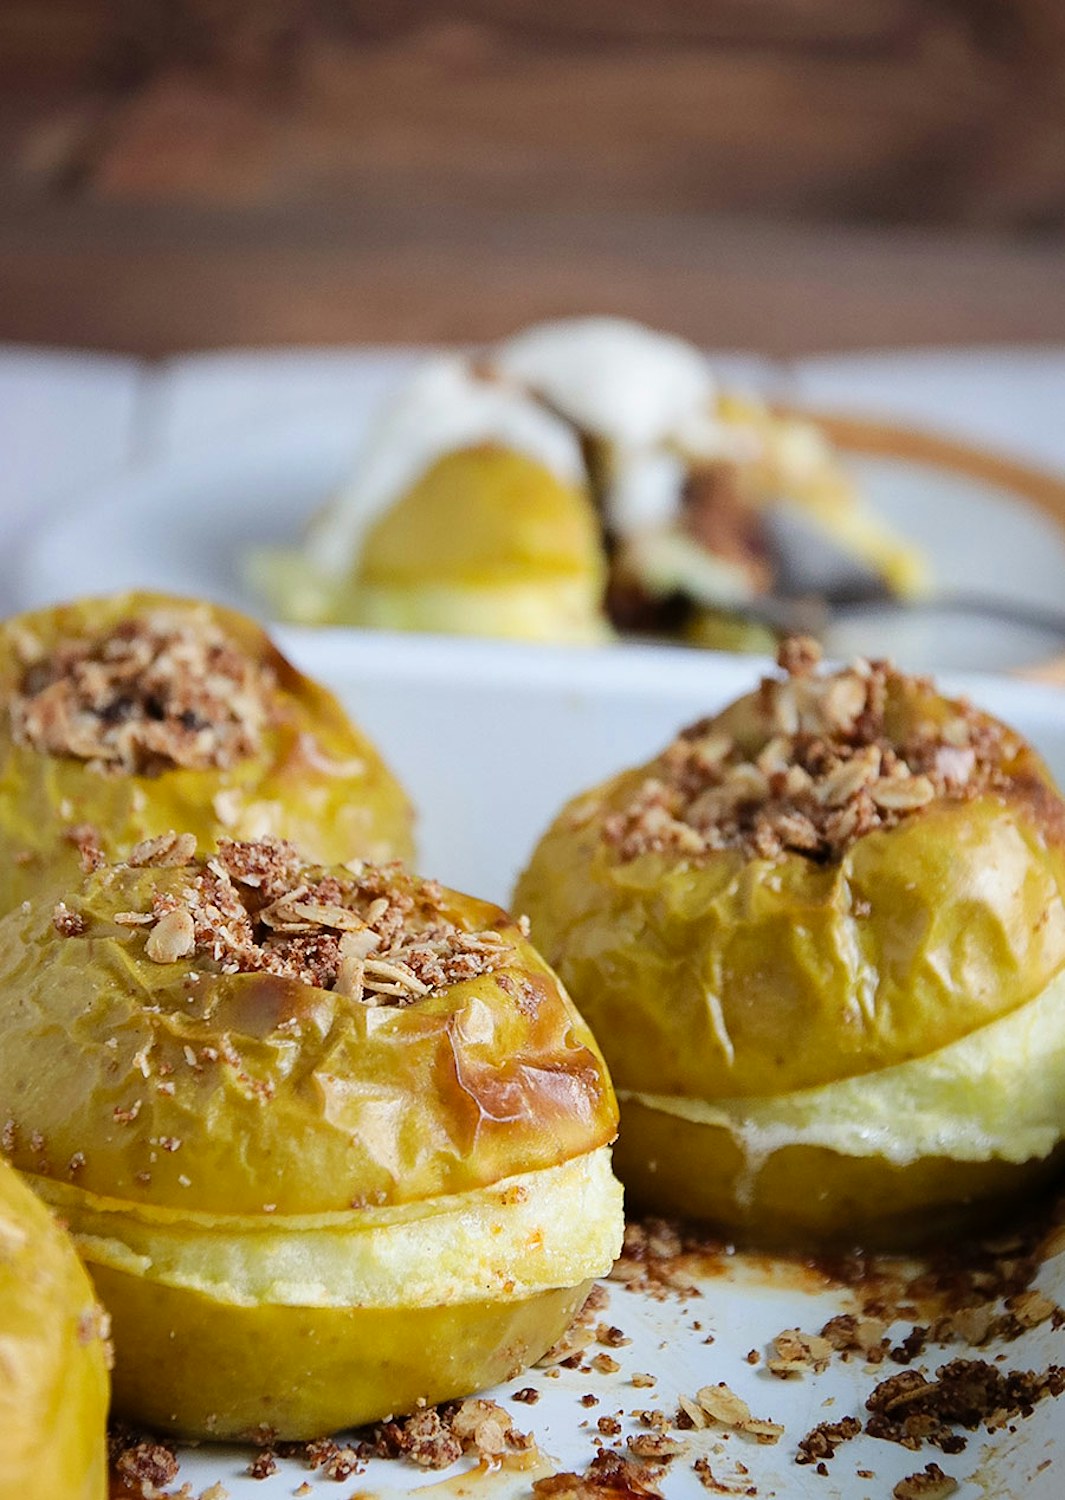 Crumble filled Baked Apples